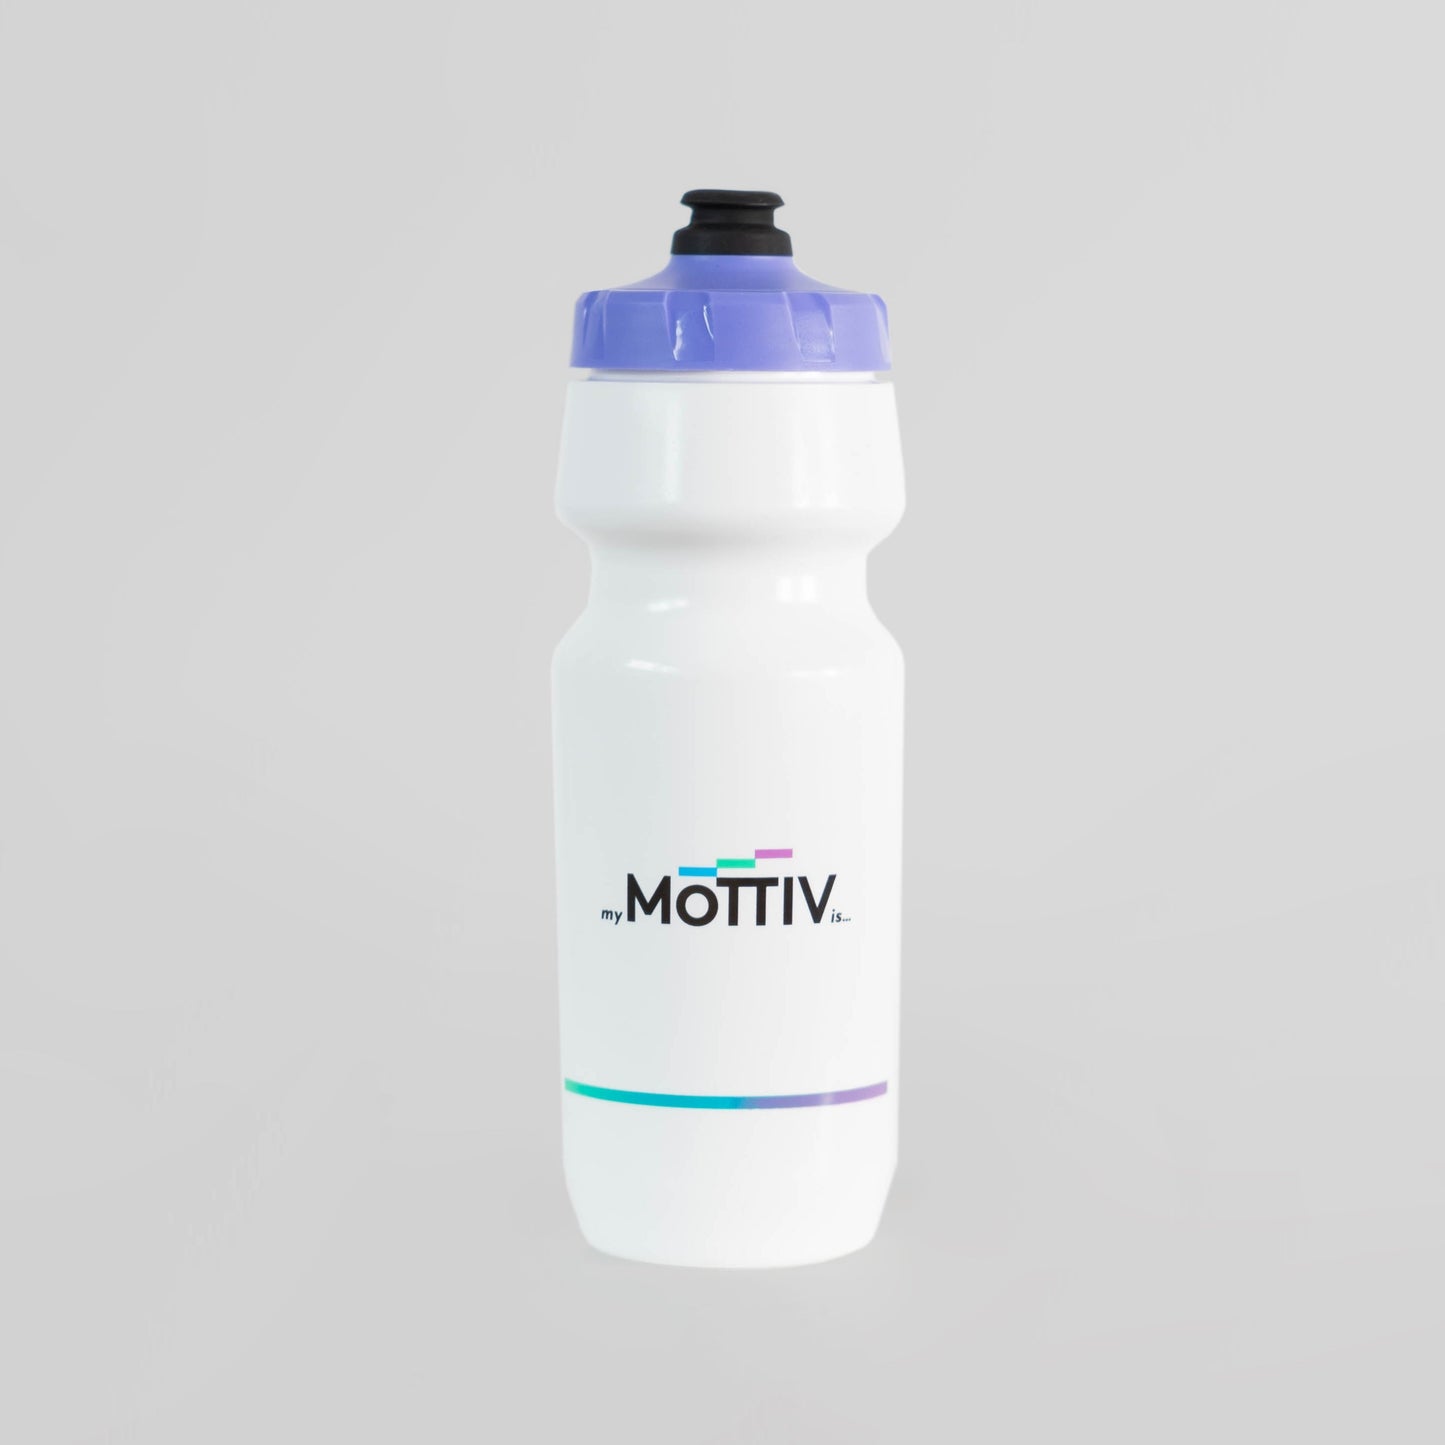 Closeup image of MōTTIV logo on a white water bottle with a purple cap